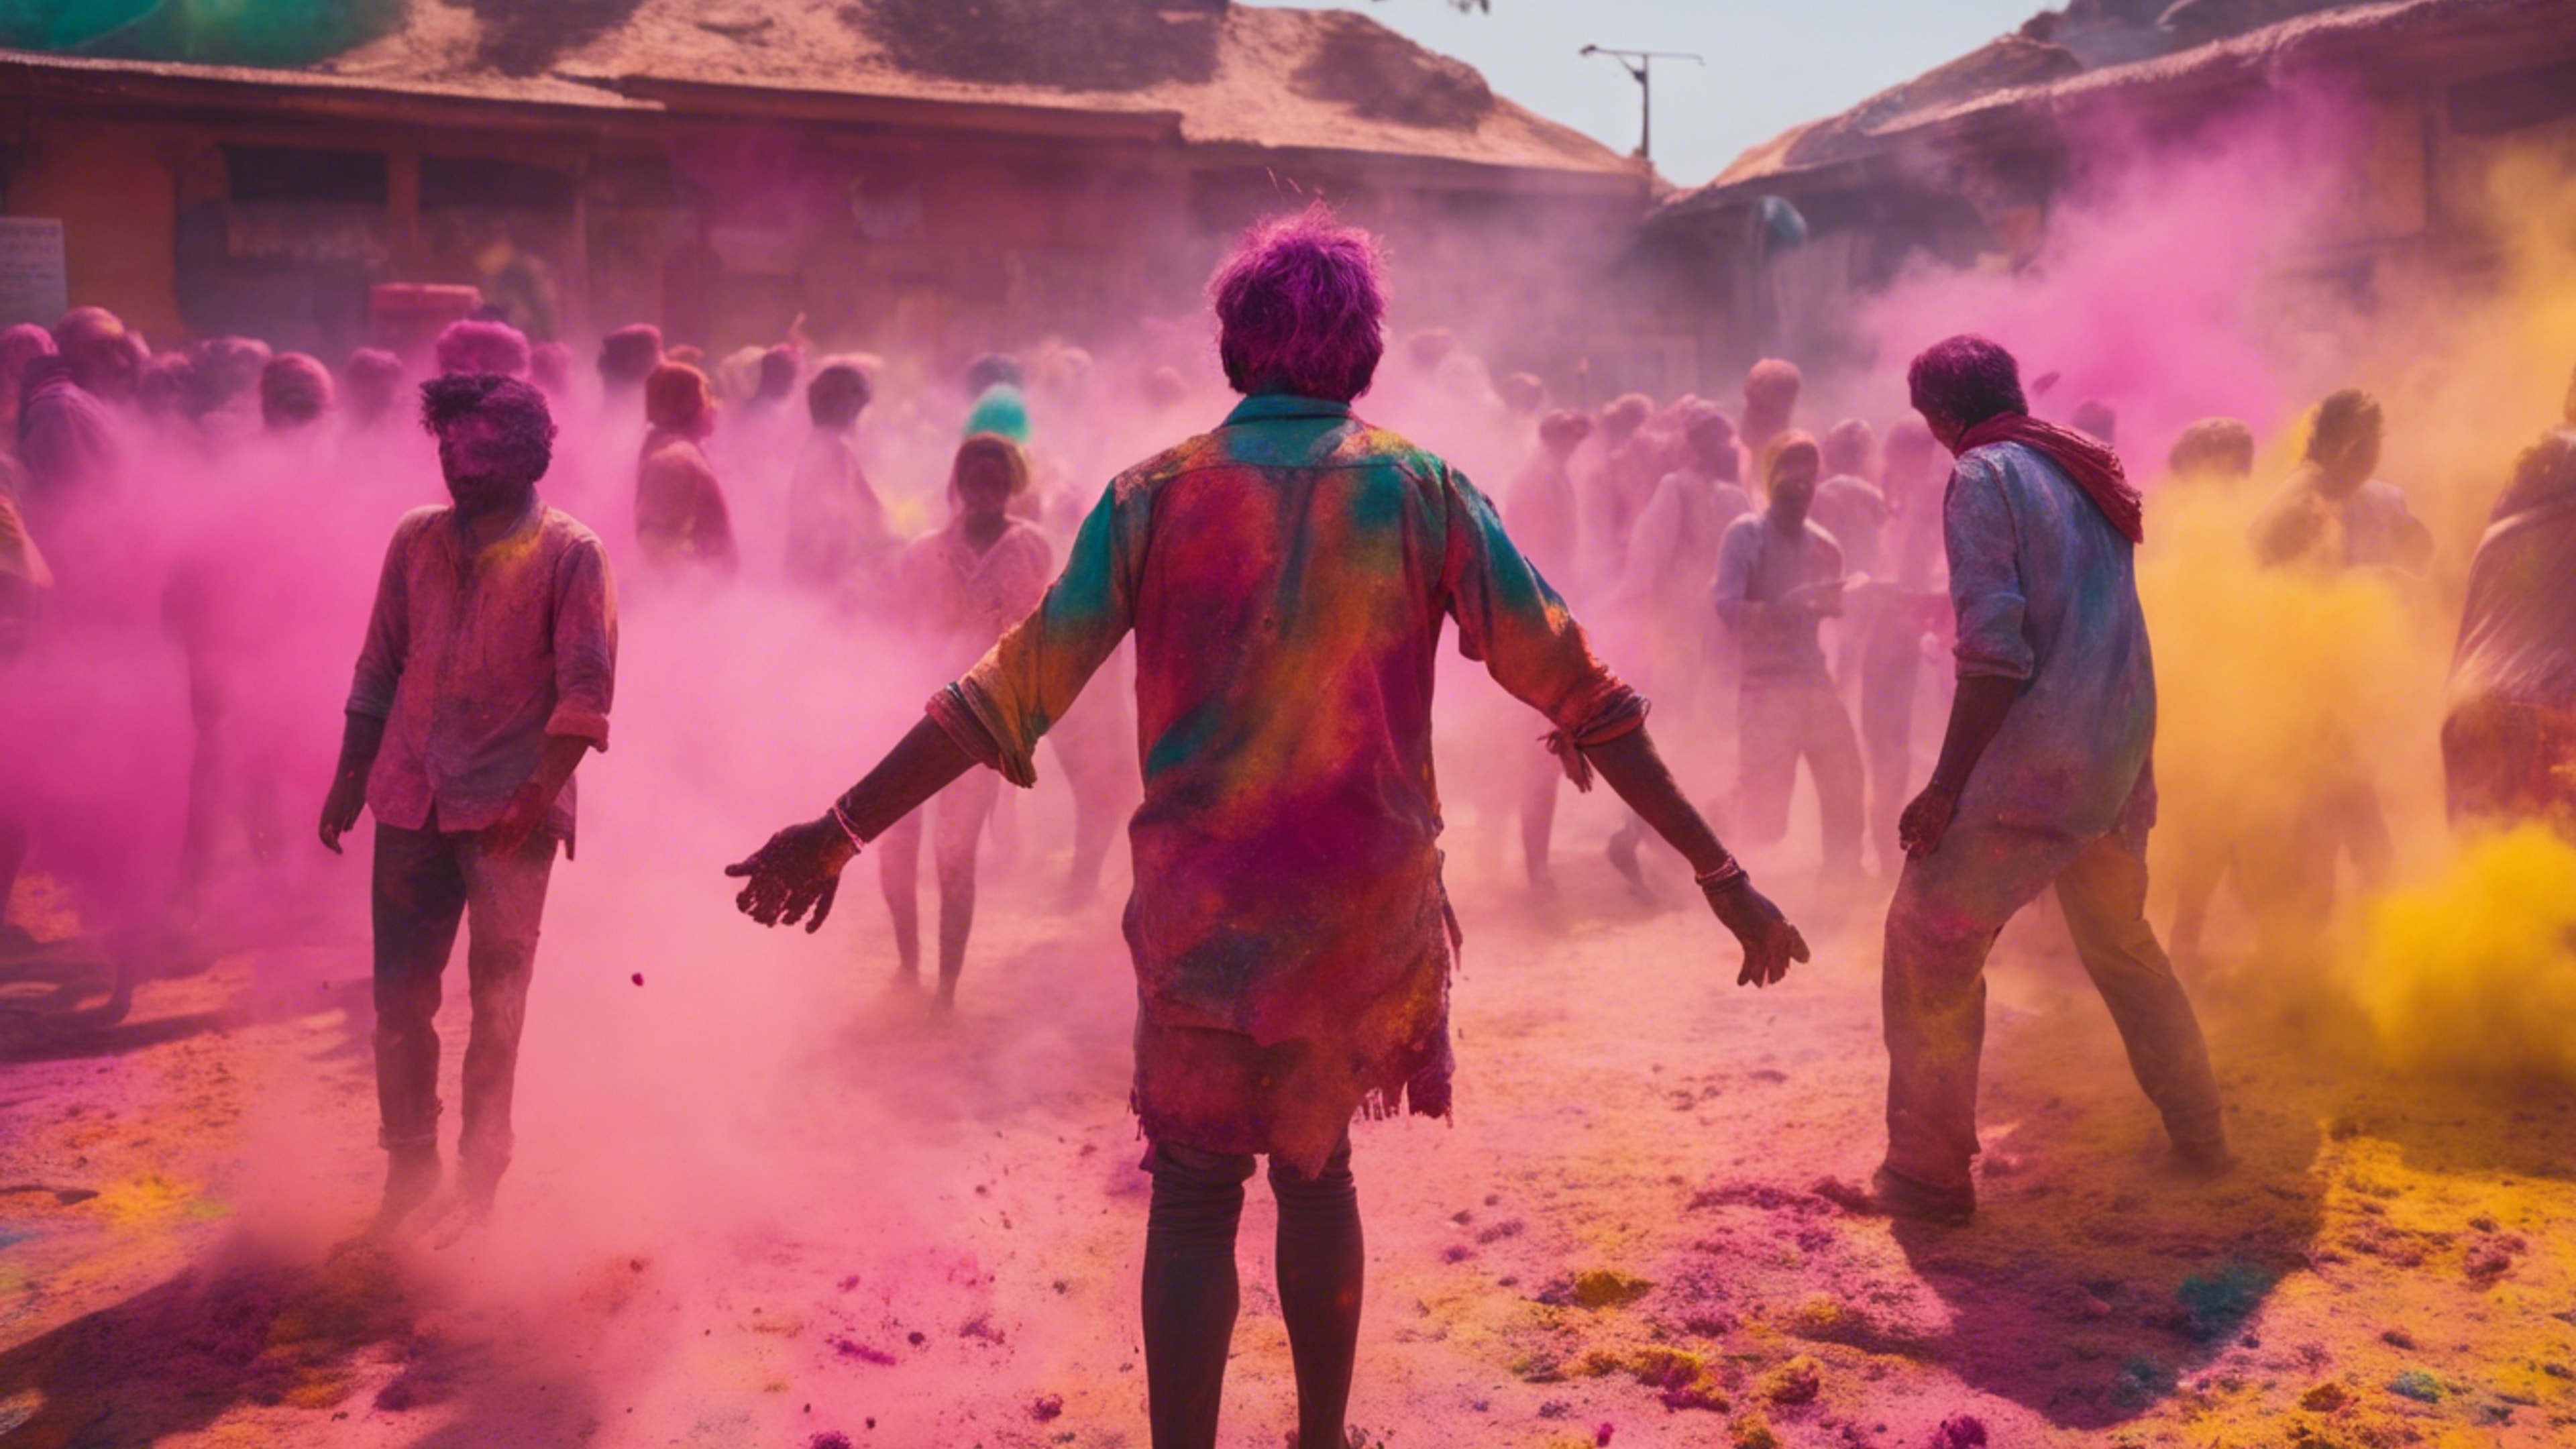 A vibrant and colorful Holi festival with people throwing powdered colors and laughing in the backdrop of an old Indian city. Tapet[6dae05cbdf264a67bd16]